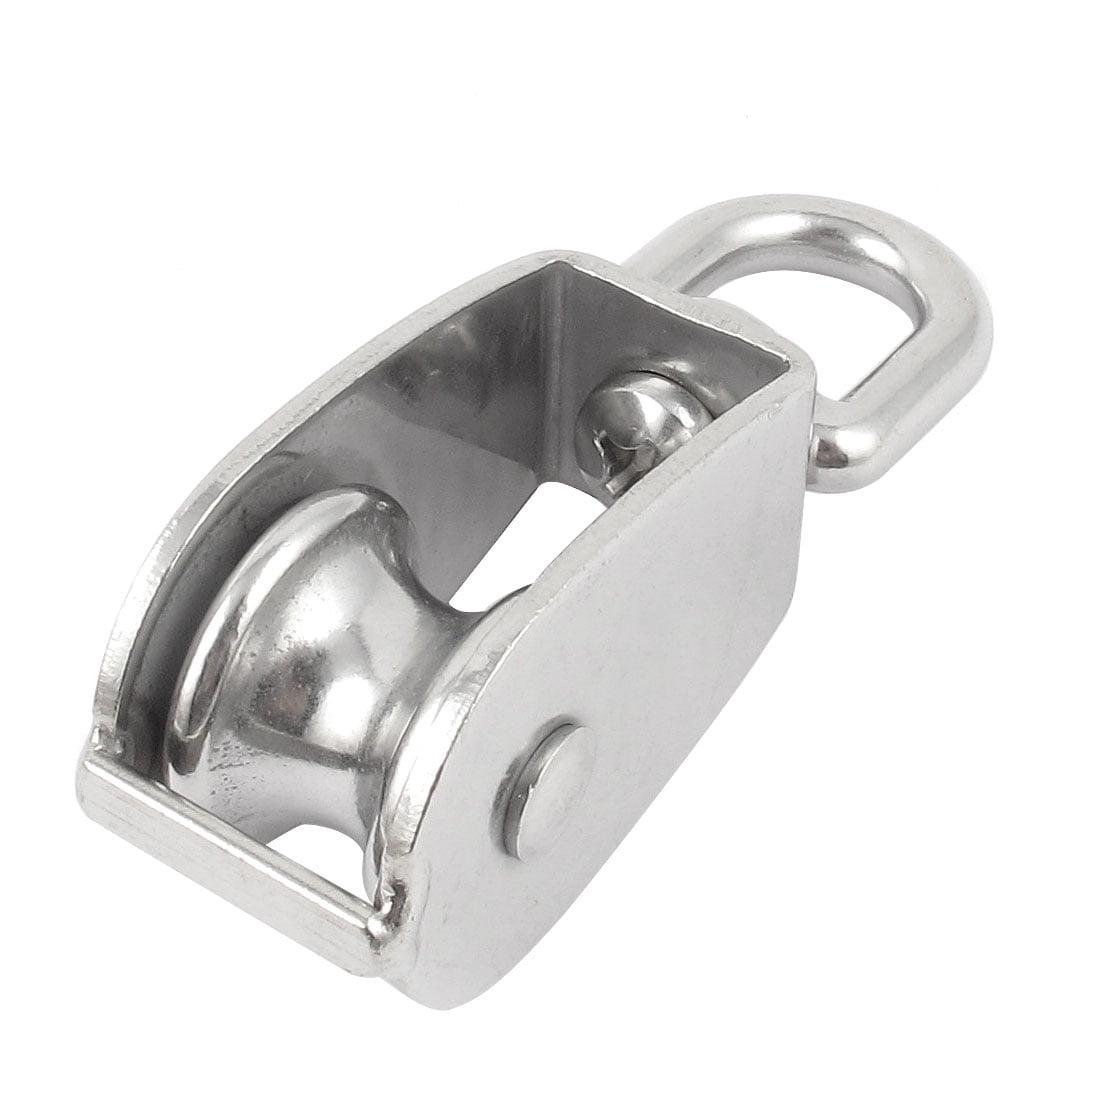 STAINLESS STEEL 25mm SINGLE PULLEY BLOCK ROPE CHAIN LIFTING SHEAVE 